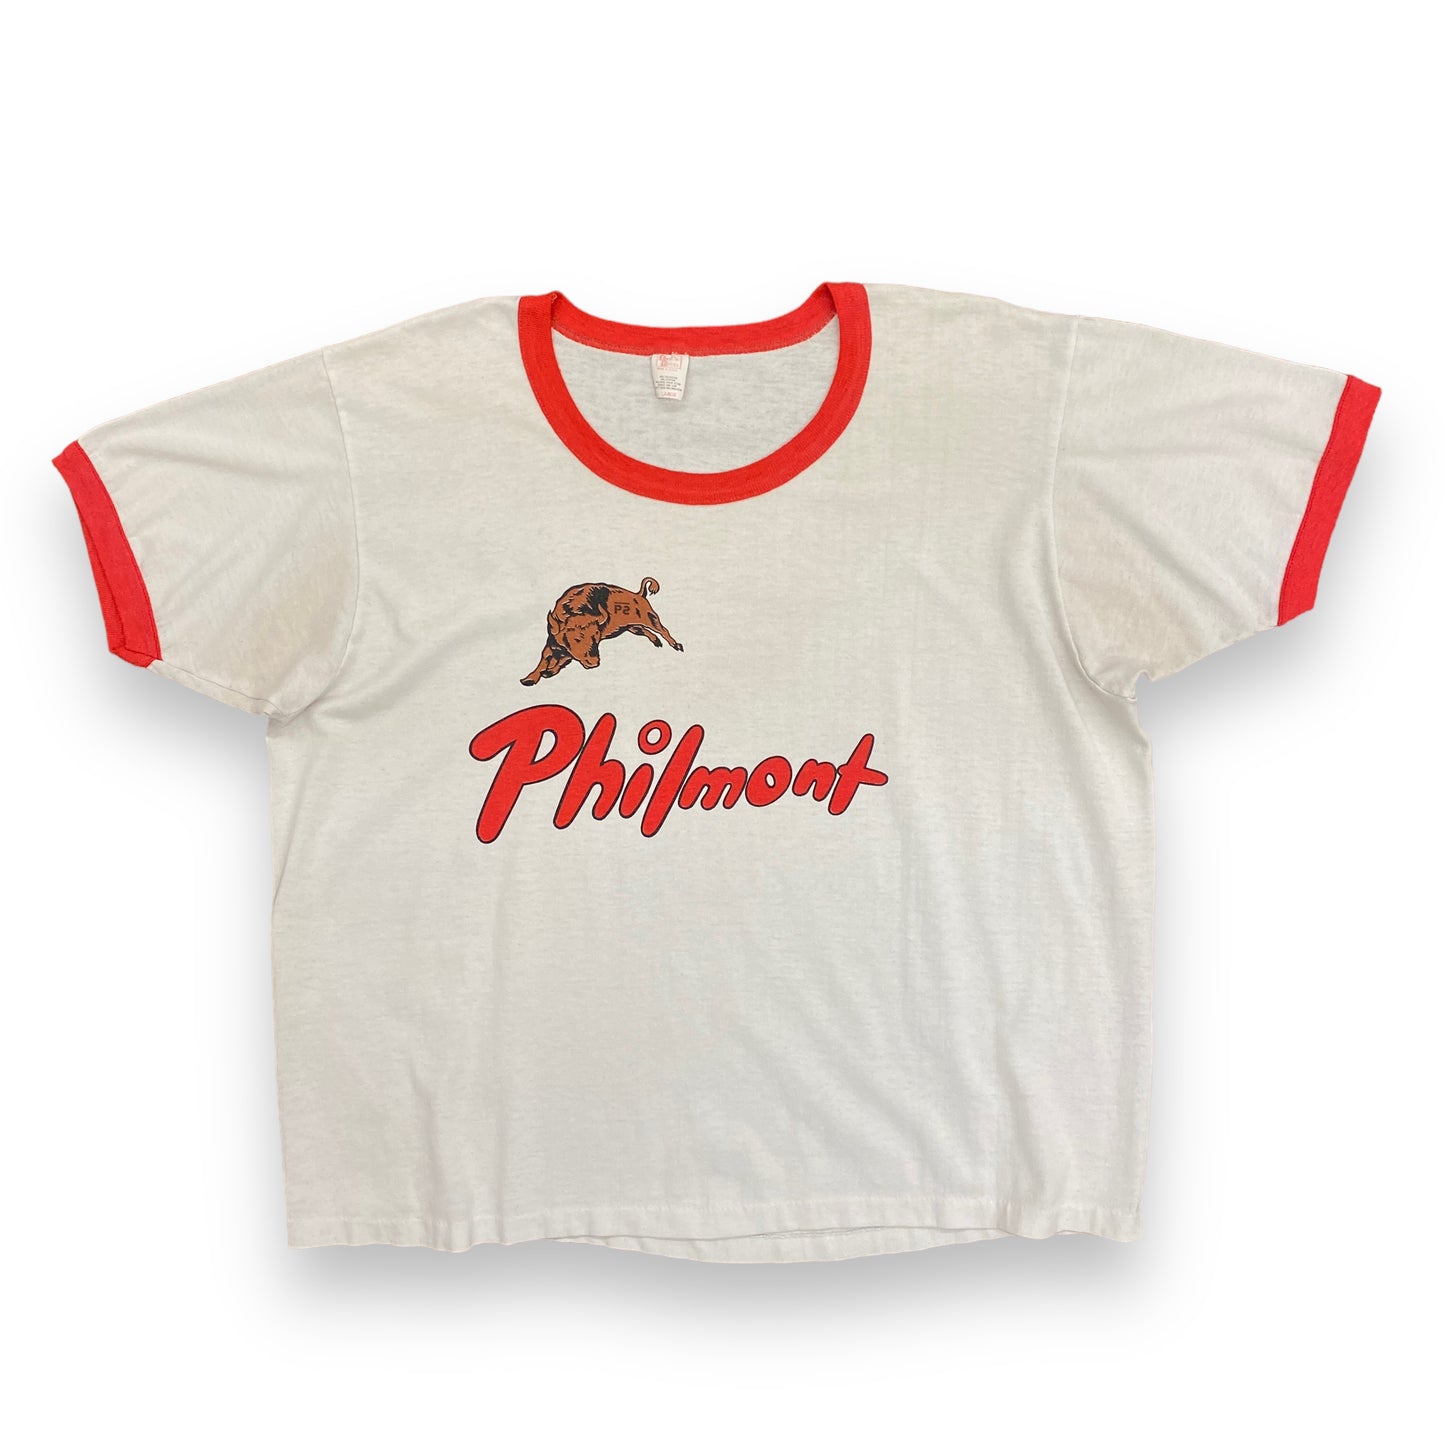 Vintage 1970s Philmont Scout Ranch Red & White Ringer Tee - Size XL